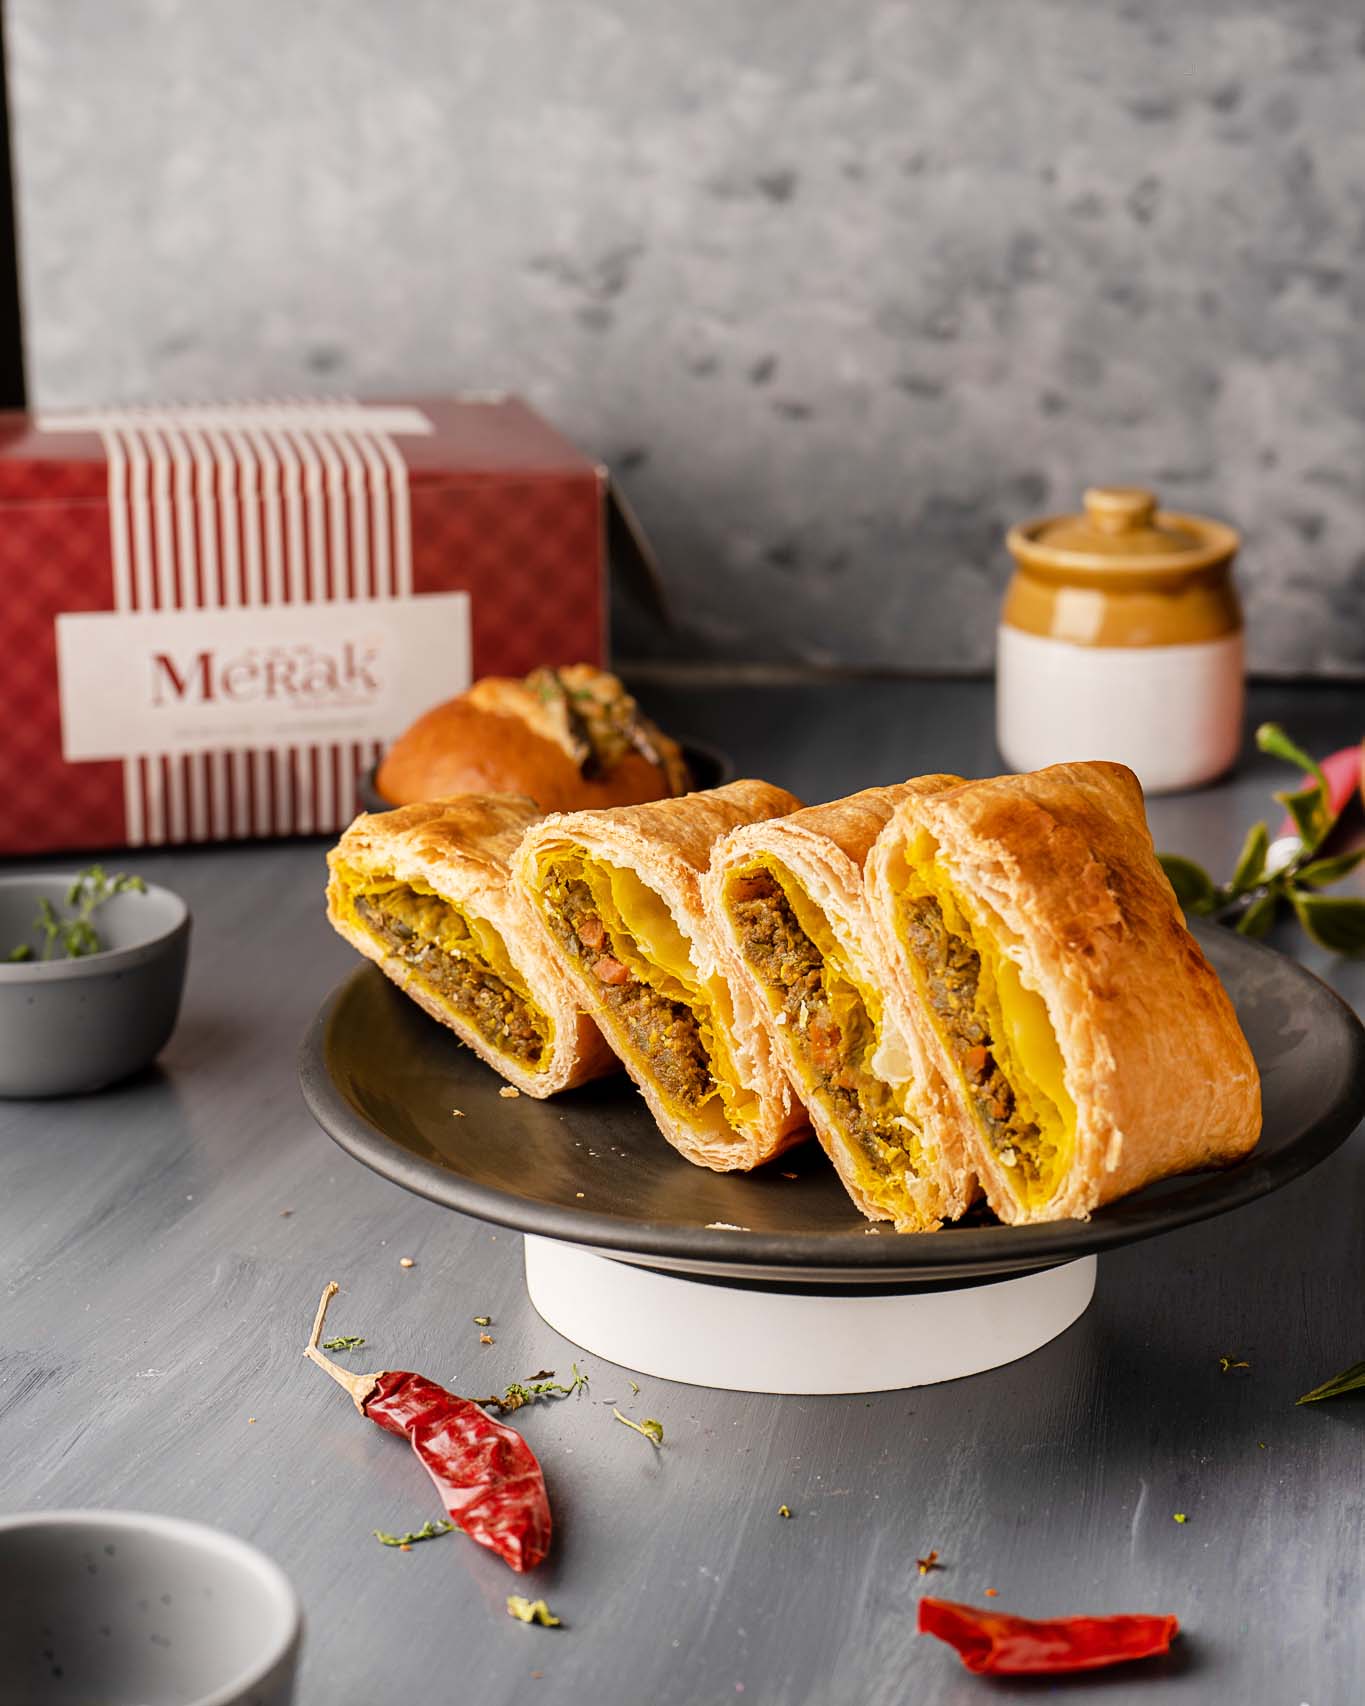 Irresistible Veg Patties at Rs 25 per Piece  Order Now for a Flavorful  Bite! – Merak Cakes